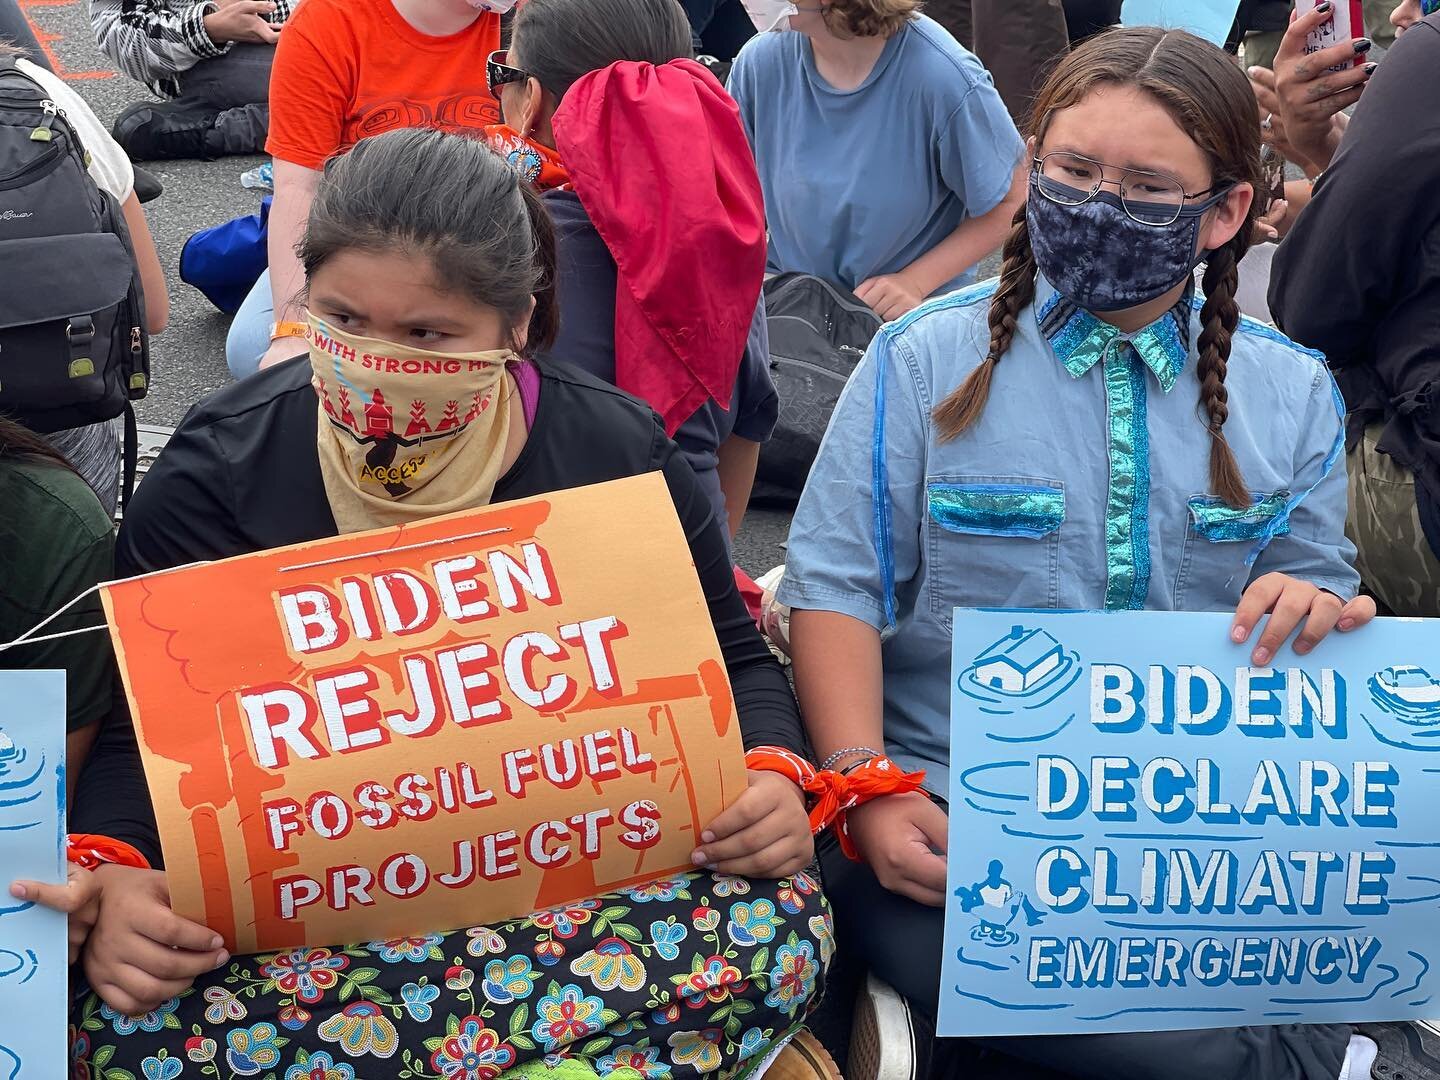  Indigenous leaders Love Hopkins and Silas Neeland are asking  @potus  to consider future generations  #cleanwater   #cleanair  snd  #landback  so they tied themselves together with zip ties and the orange scarf provided to those who chose to be “arr